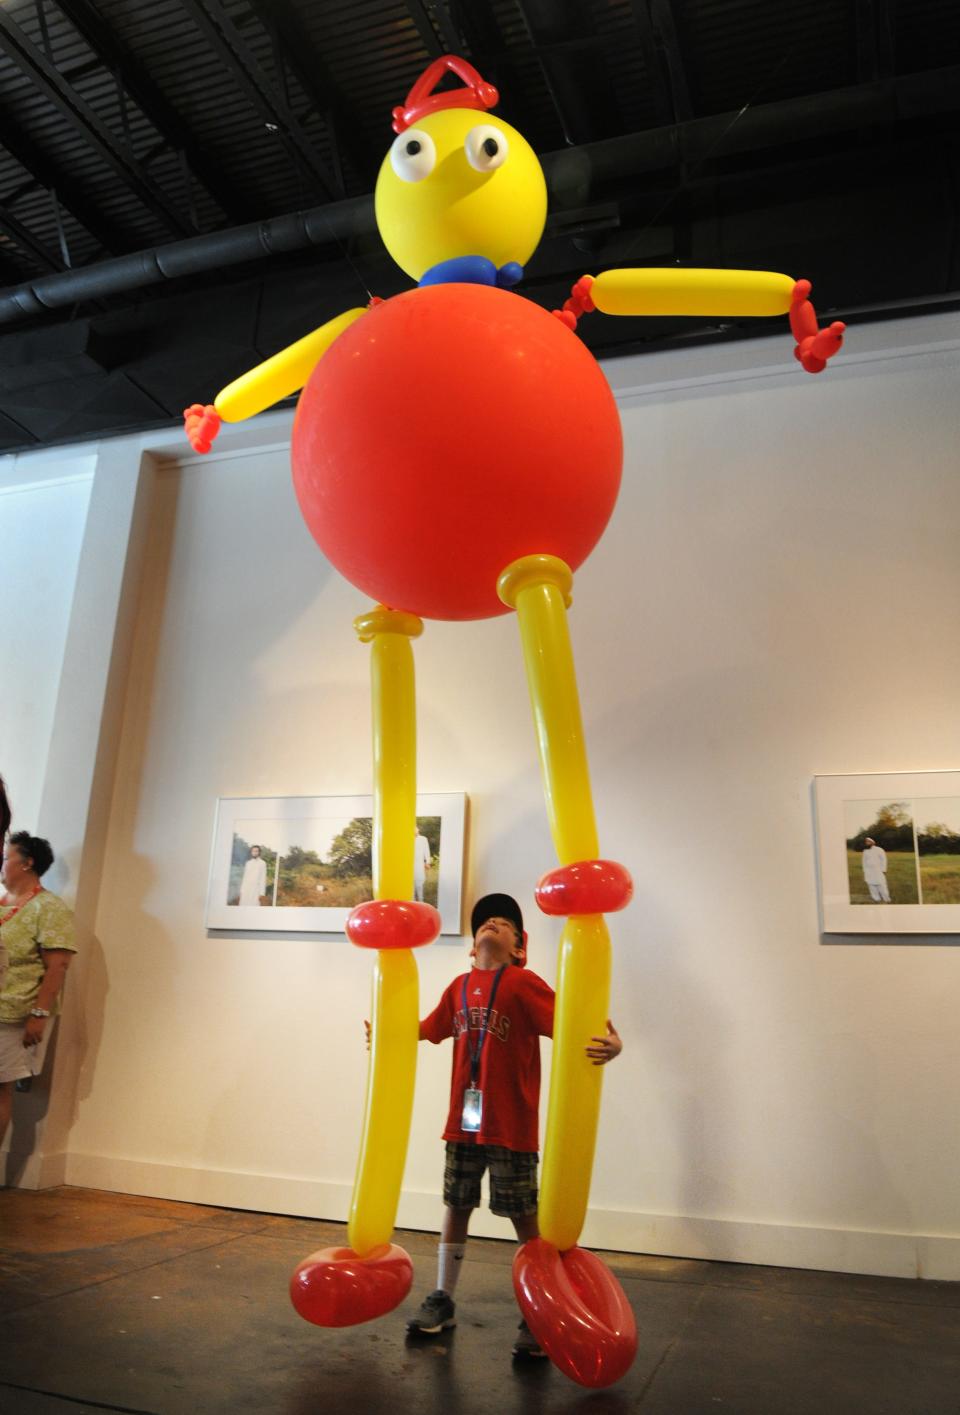 A giant Seymour, made out of balloons, during the Children's Art & Literacy Festival in 2013.